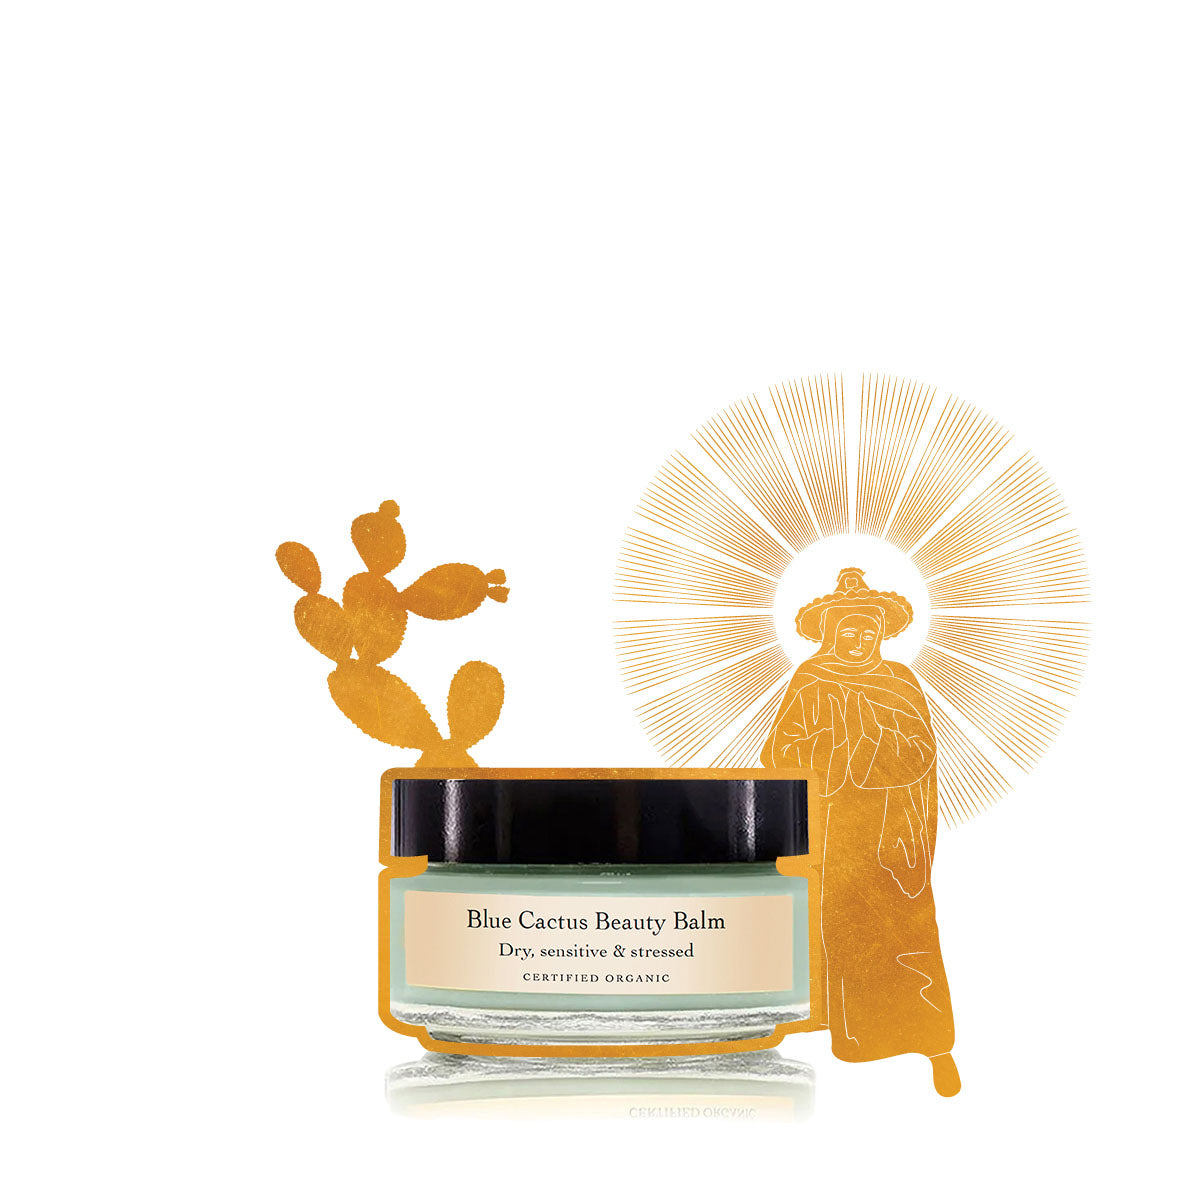 evanhealy blue cactus beauty balm gilded graphic